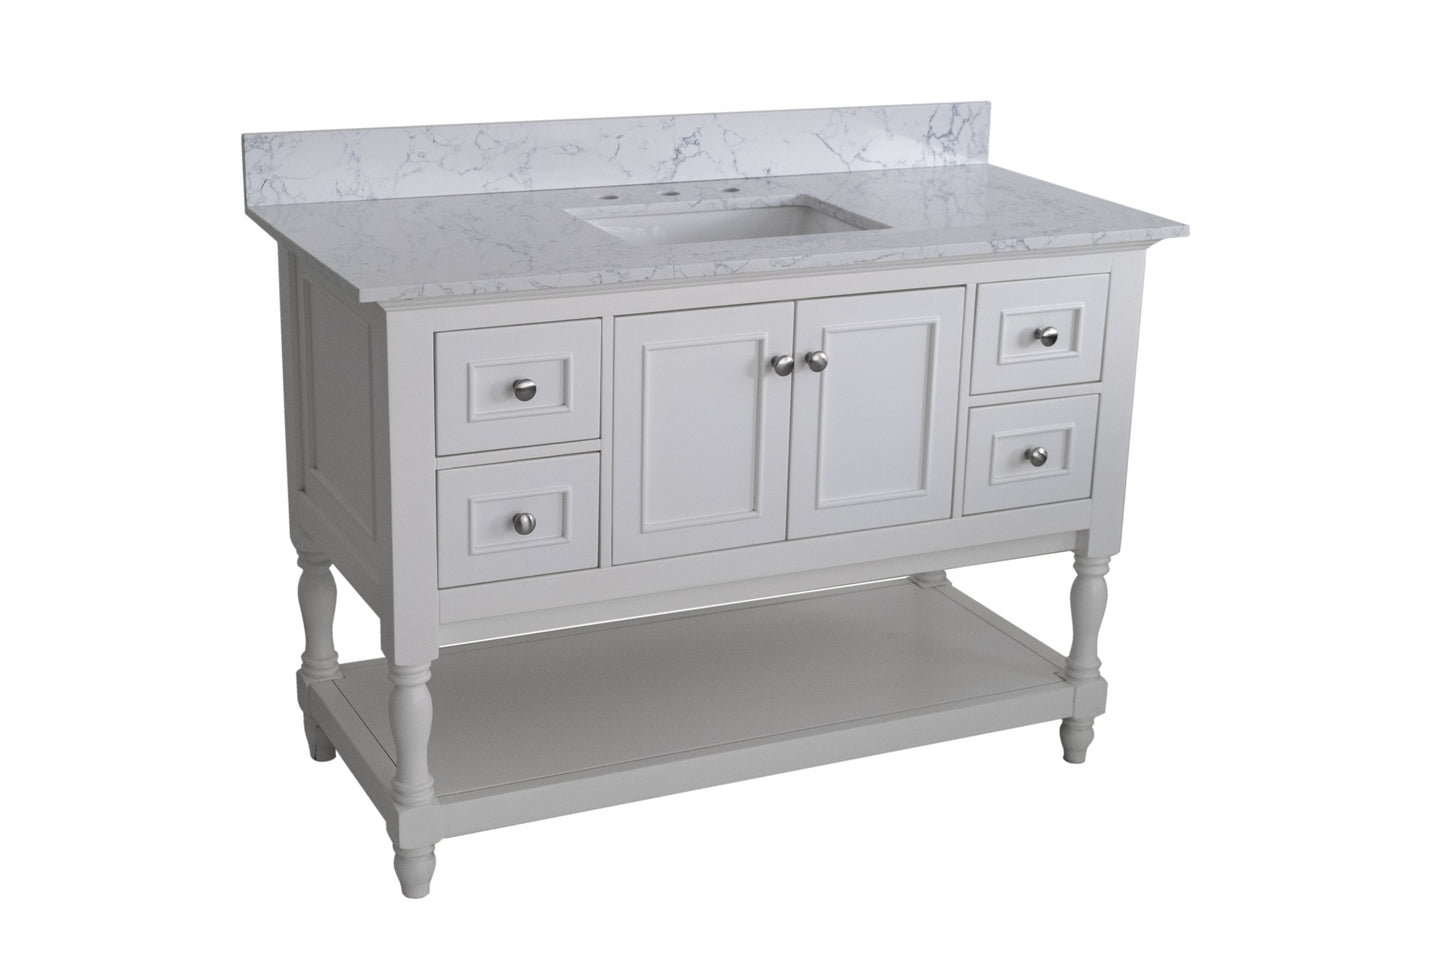 Montary 43"x 22" bathroom stone vanity top carrara jade  engineered marble color with undermount ceramic sink and 3 faucet hole with backsplash